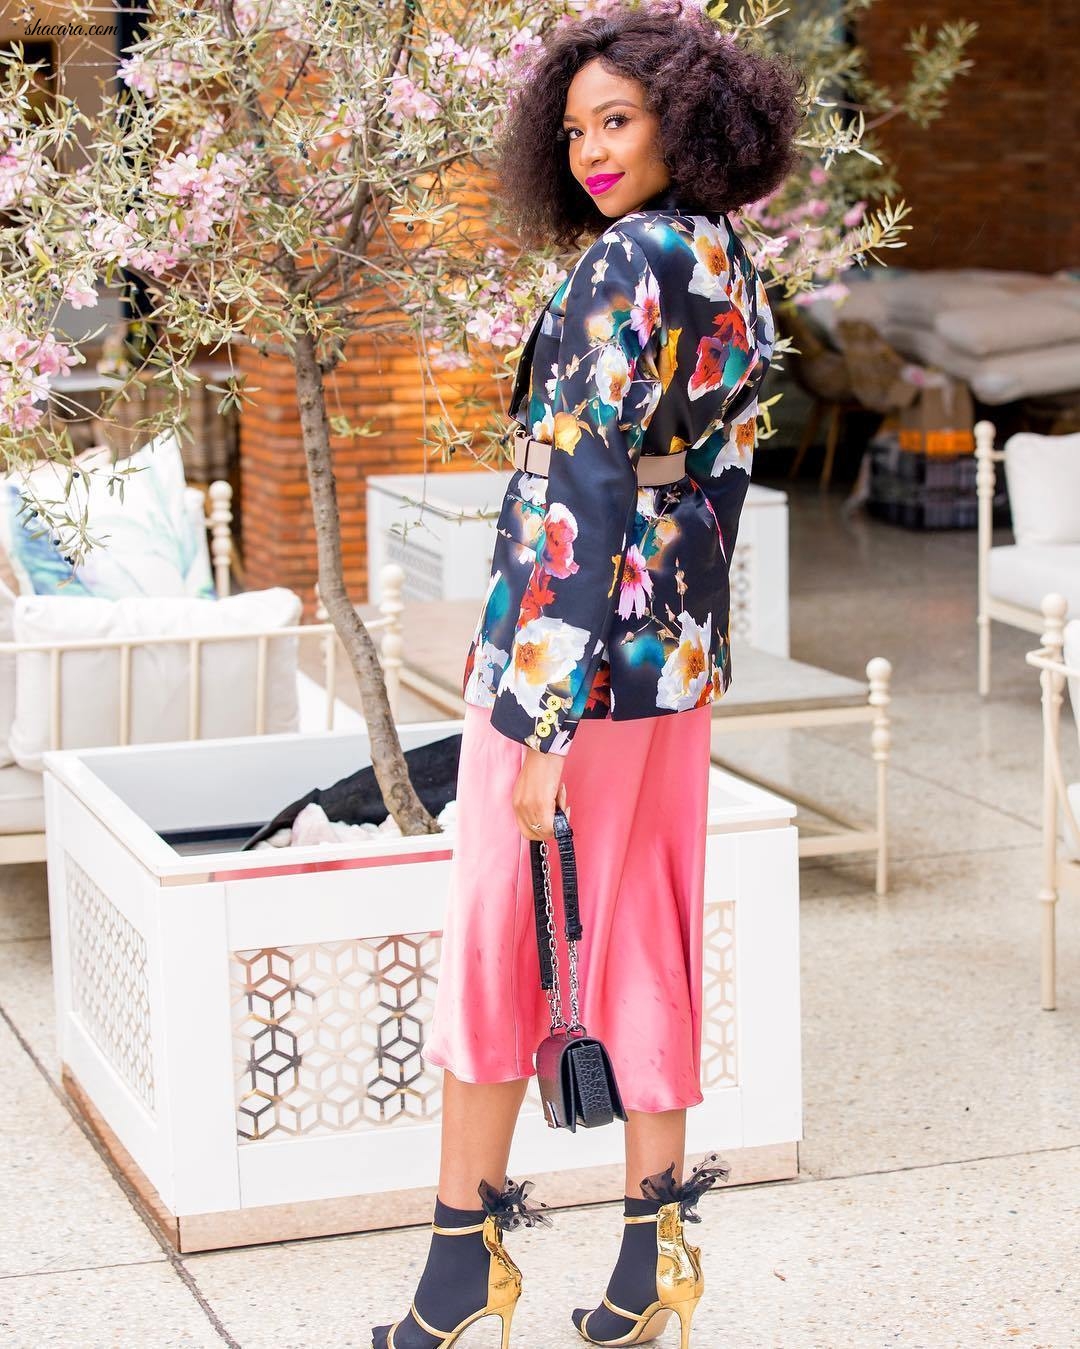 Style Look Of The Day: Blue Mbombo’s Uber Chic Floral Ensemble